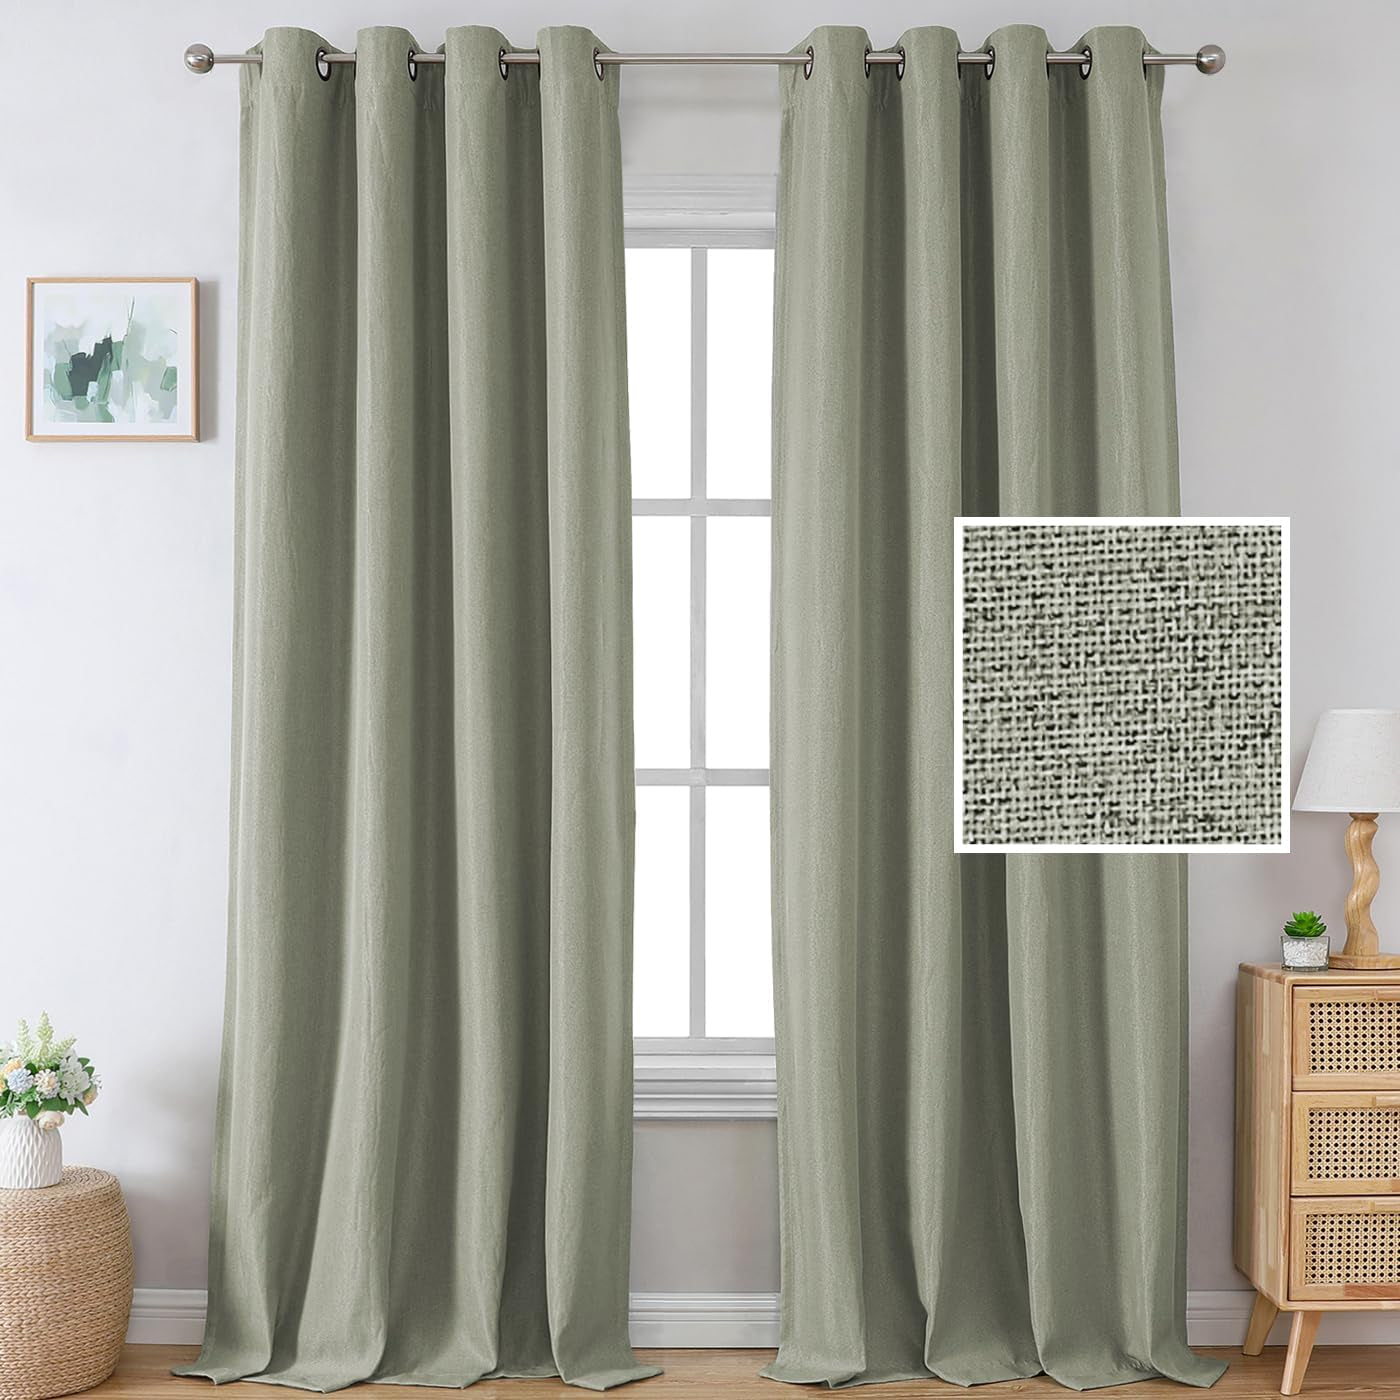 H.VERSAILTEX Linen Blackout Curtains 84 Inches Long Thermal Insulated Room Darkening Linen Curtains for Bedroom Textured Burlap Grommet Window Curtains for Living Room, Bluestone and Taupe, 2 Panels  H.VERSAILTEX Sage 52"W X 96"L 